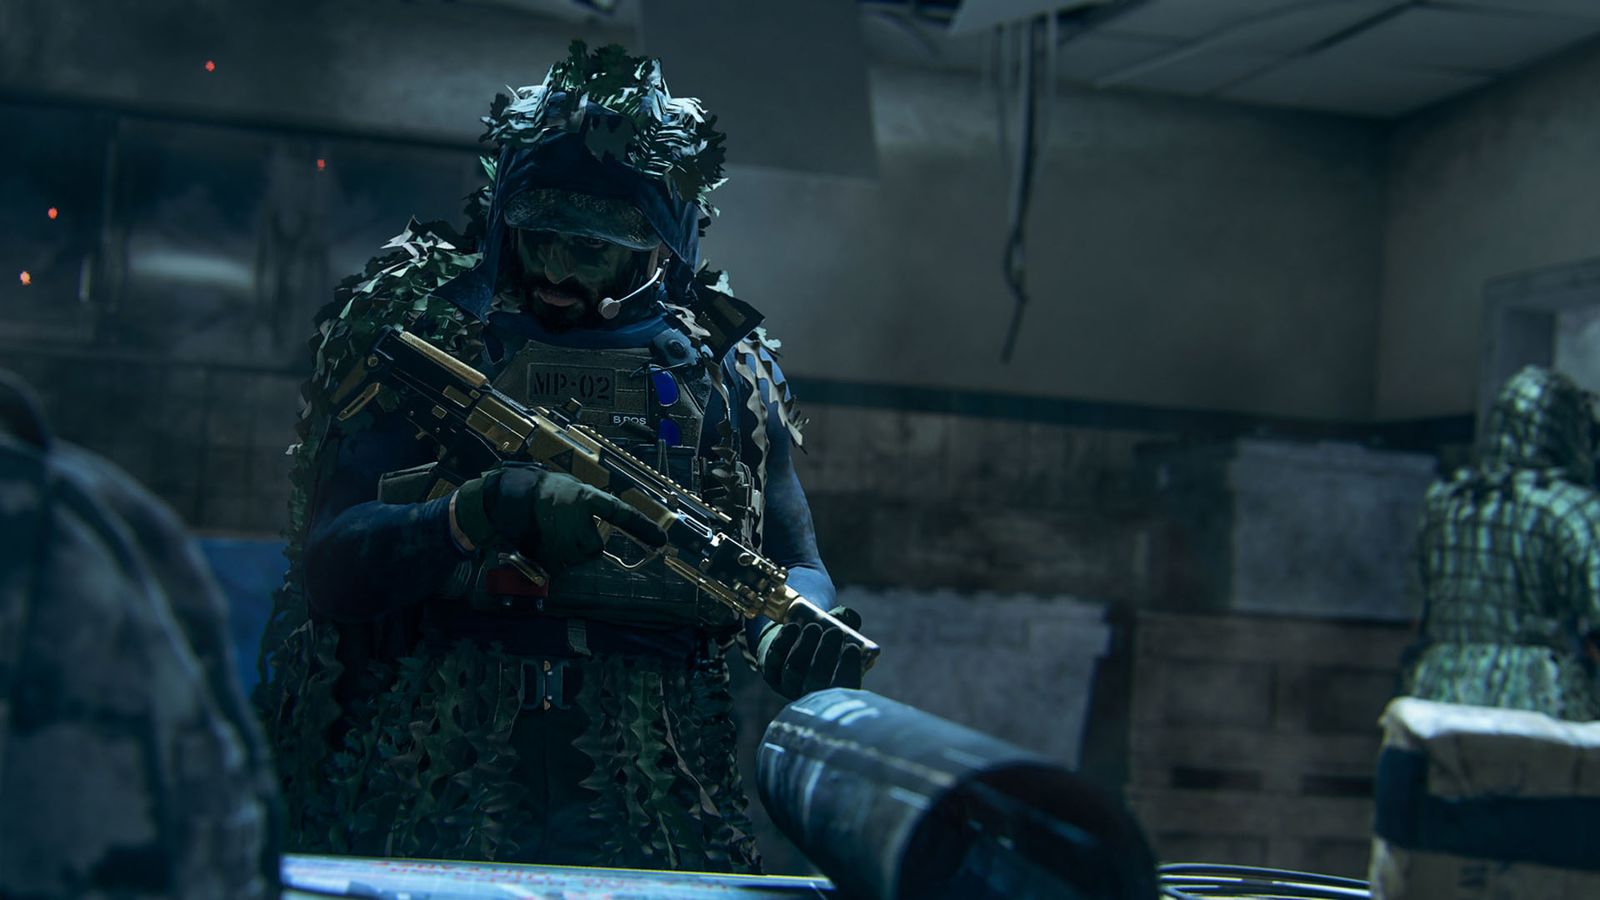 Screenshot of Modern Warfare 2 player wearing a ghillie suit and holding gun while standing next to rolled up blueprint on a table